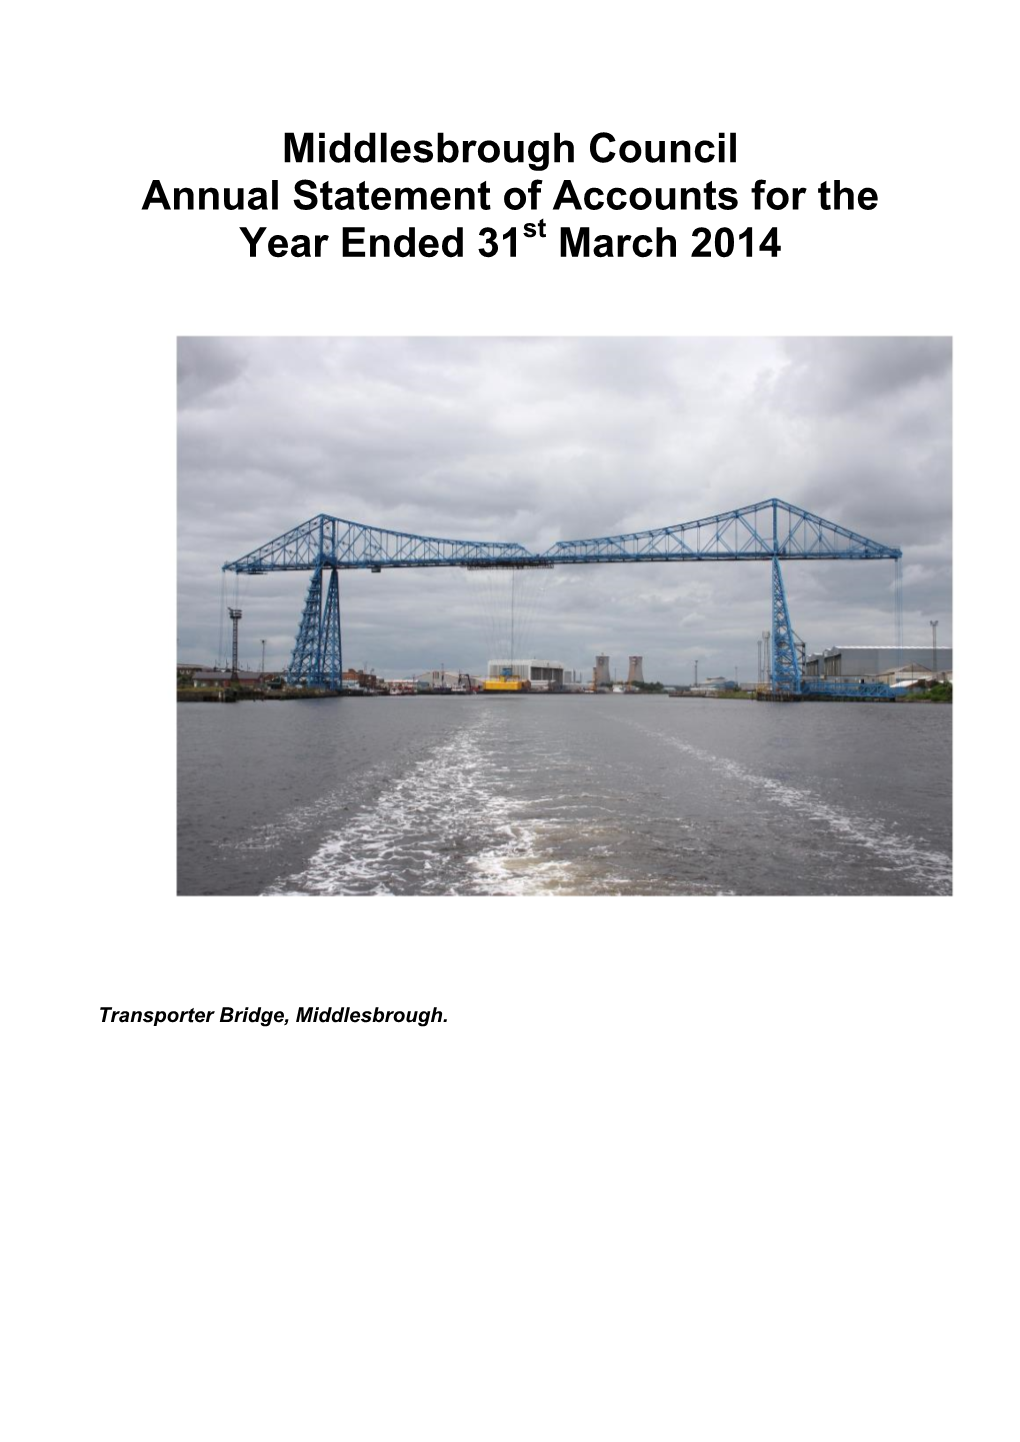 Annual Statement of Accounts for the Year Ended 31St March 2014